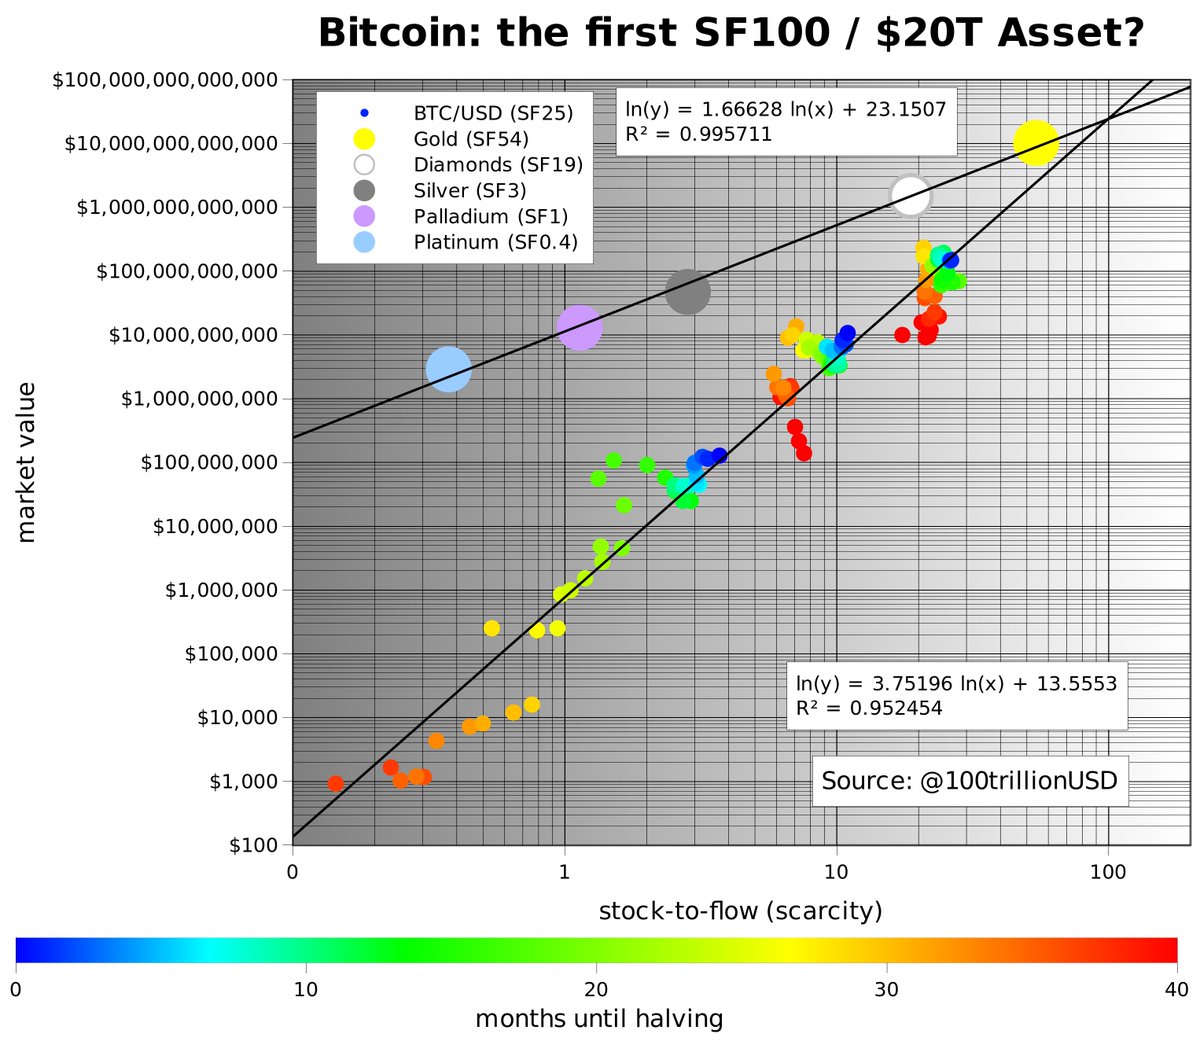 12/15 And the BTC price model of S2F is not the only aspect of S2F that jumps around a lot. The different S2F values also jump around a lot.